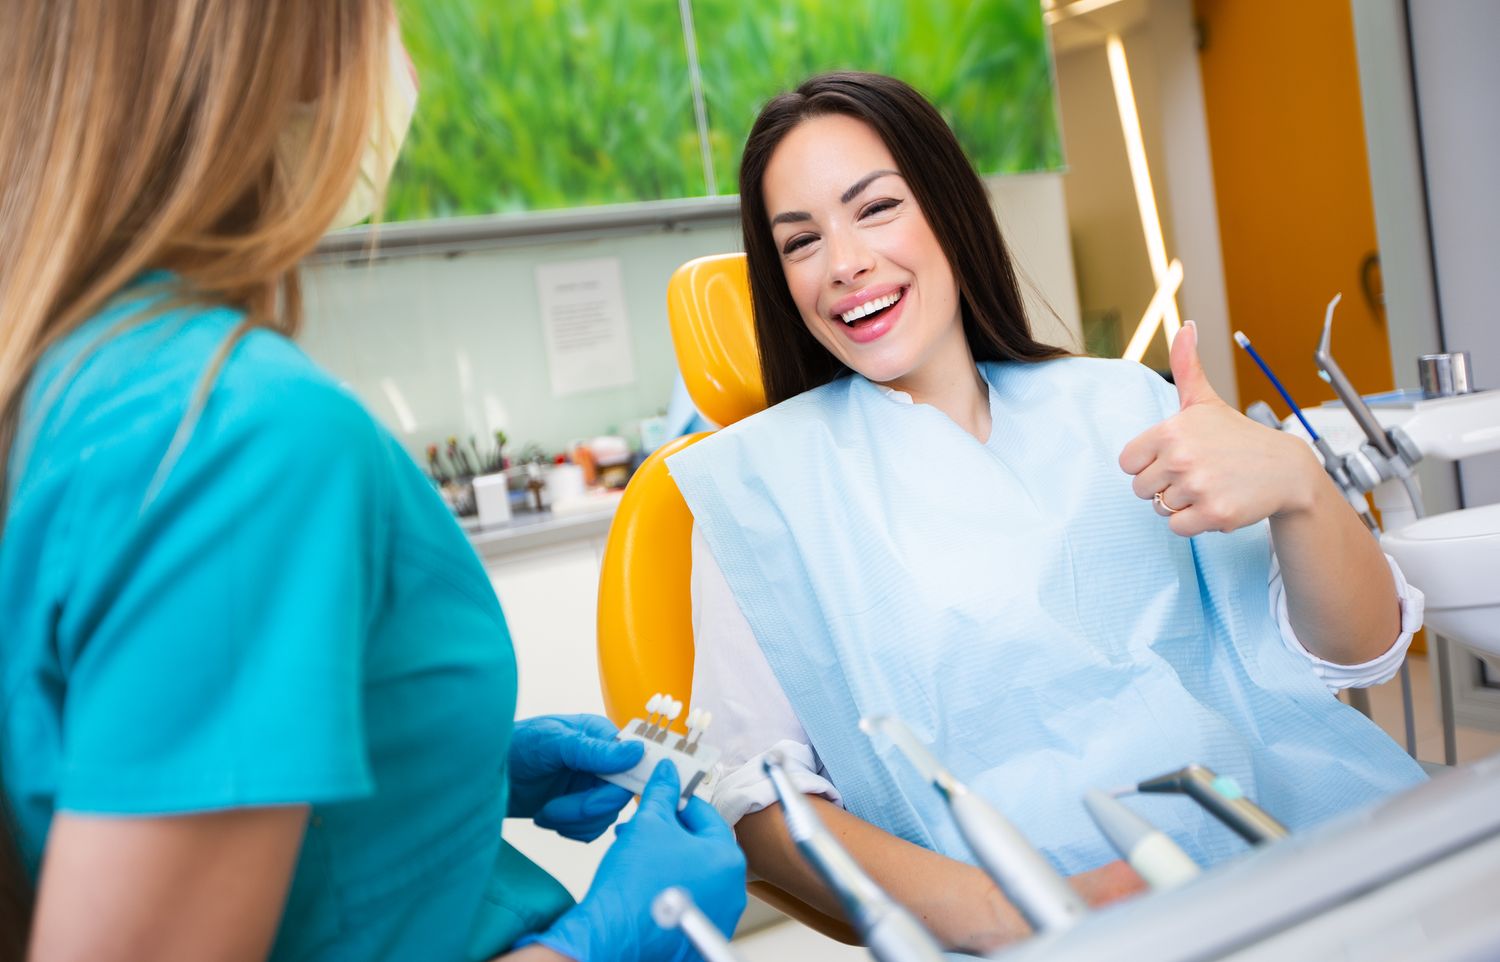 Portrait of beautiful young smiling woman visiting dentist giving thumbs up